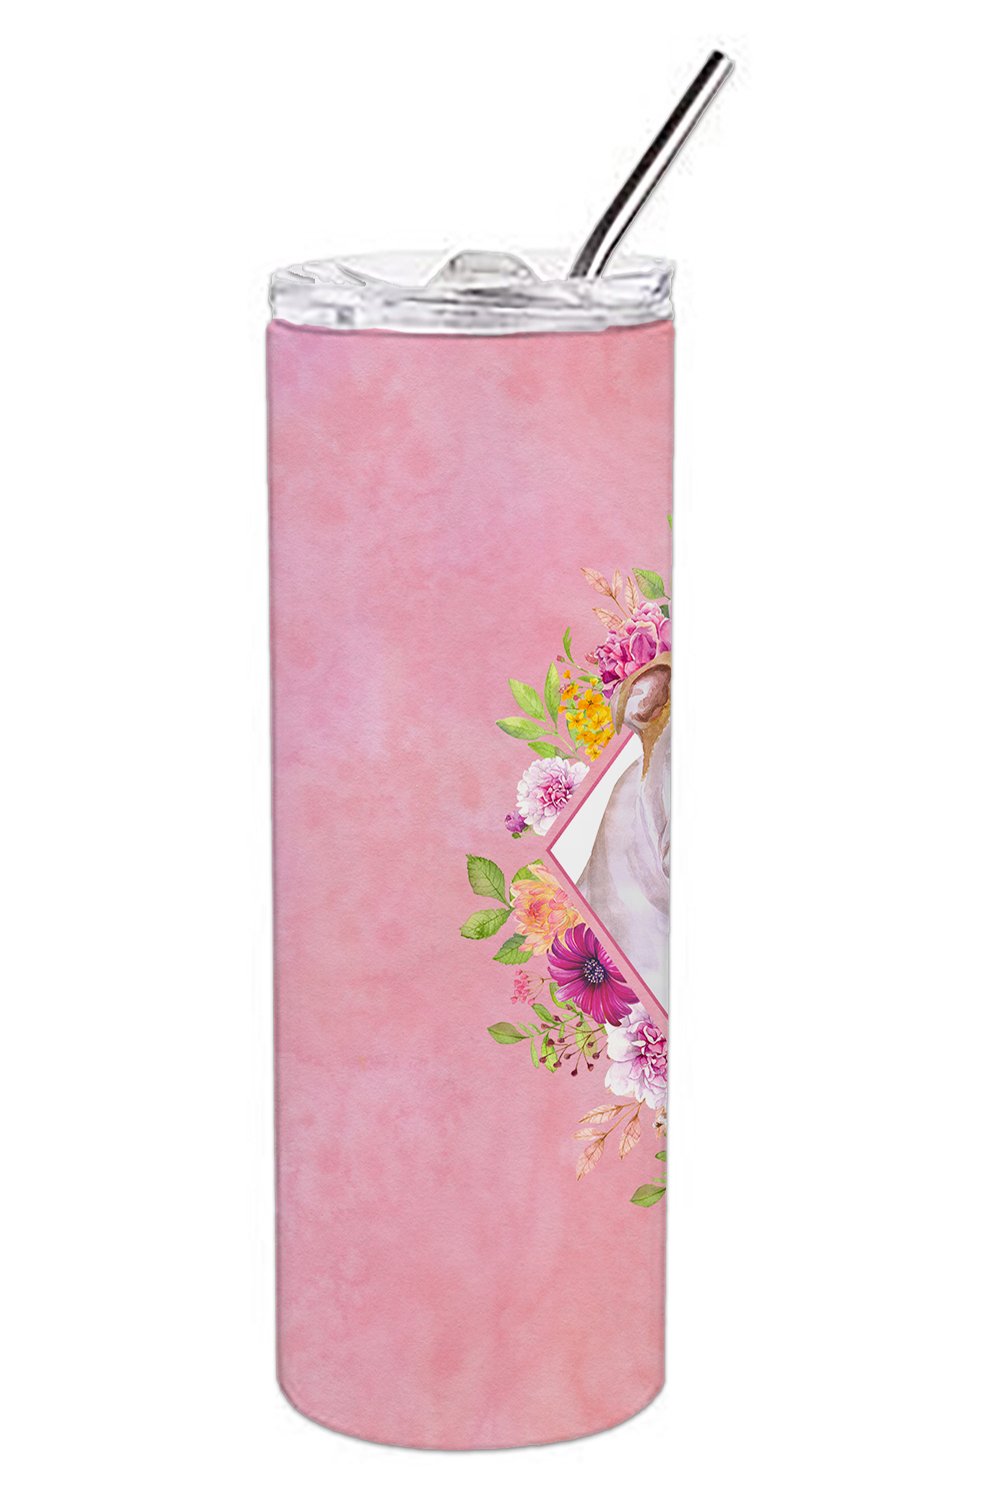 English Bulldog Pink Flowers Double Walled Stainless Steel 20 oz Skinny Tumbler CK4140TBL20 by Caroline's Treasures